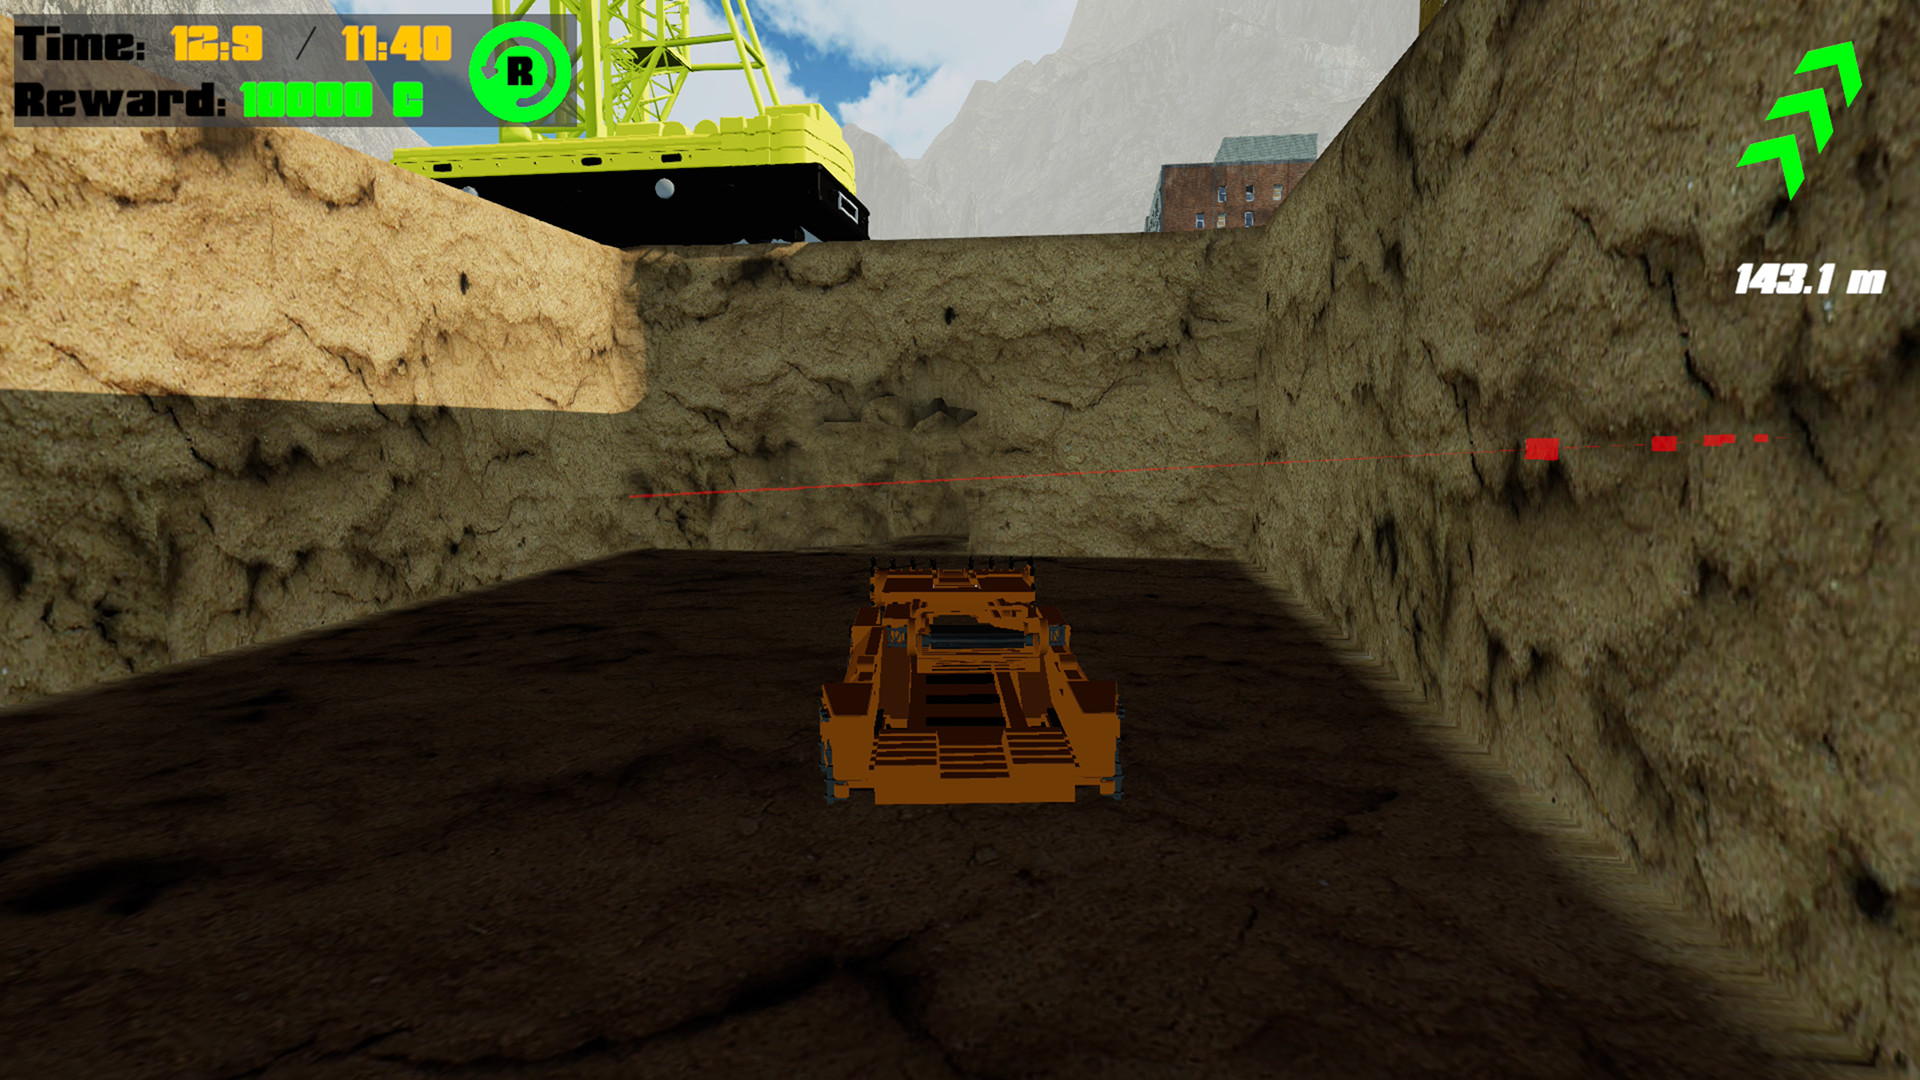 Mining & Tunneling Simulator System Requirements - Can I Run It? -  PCGameBenchmark